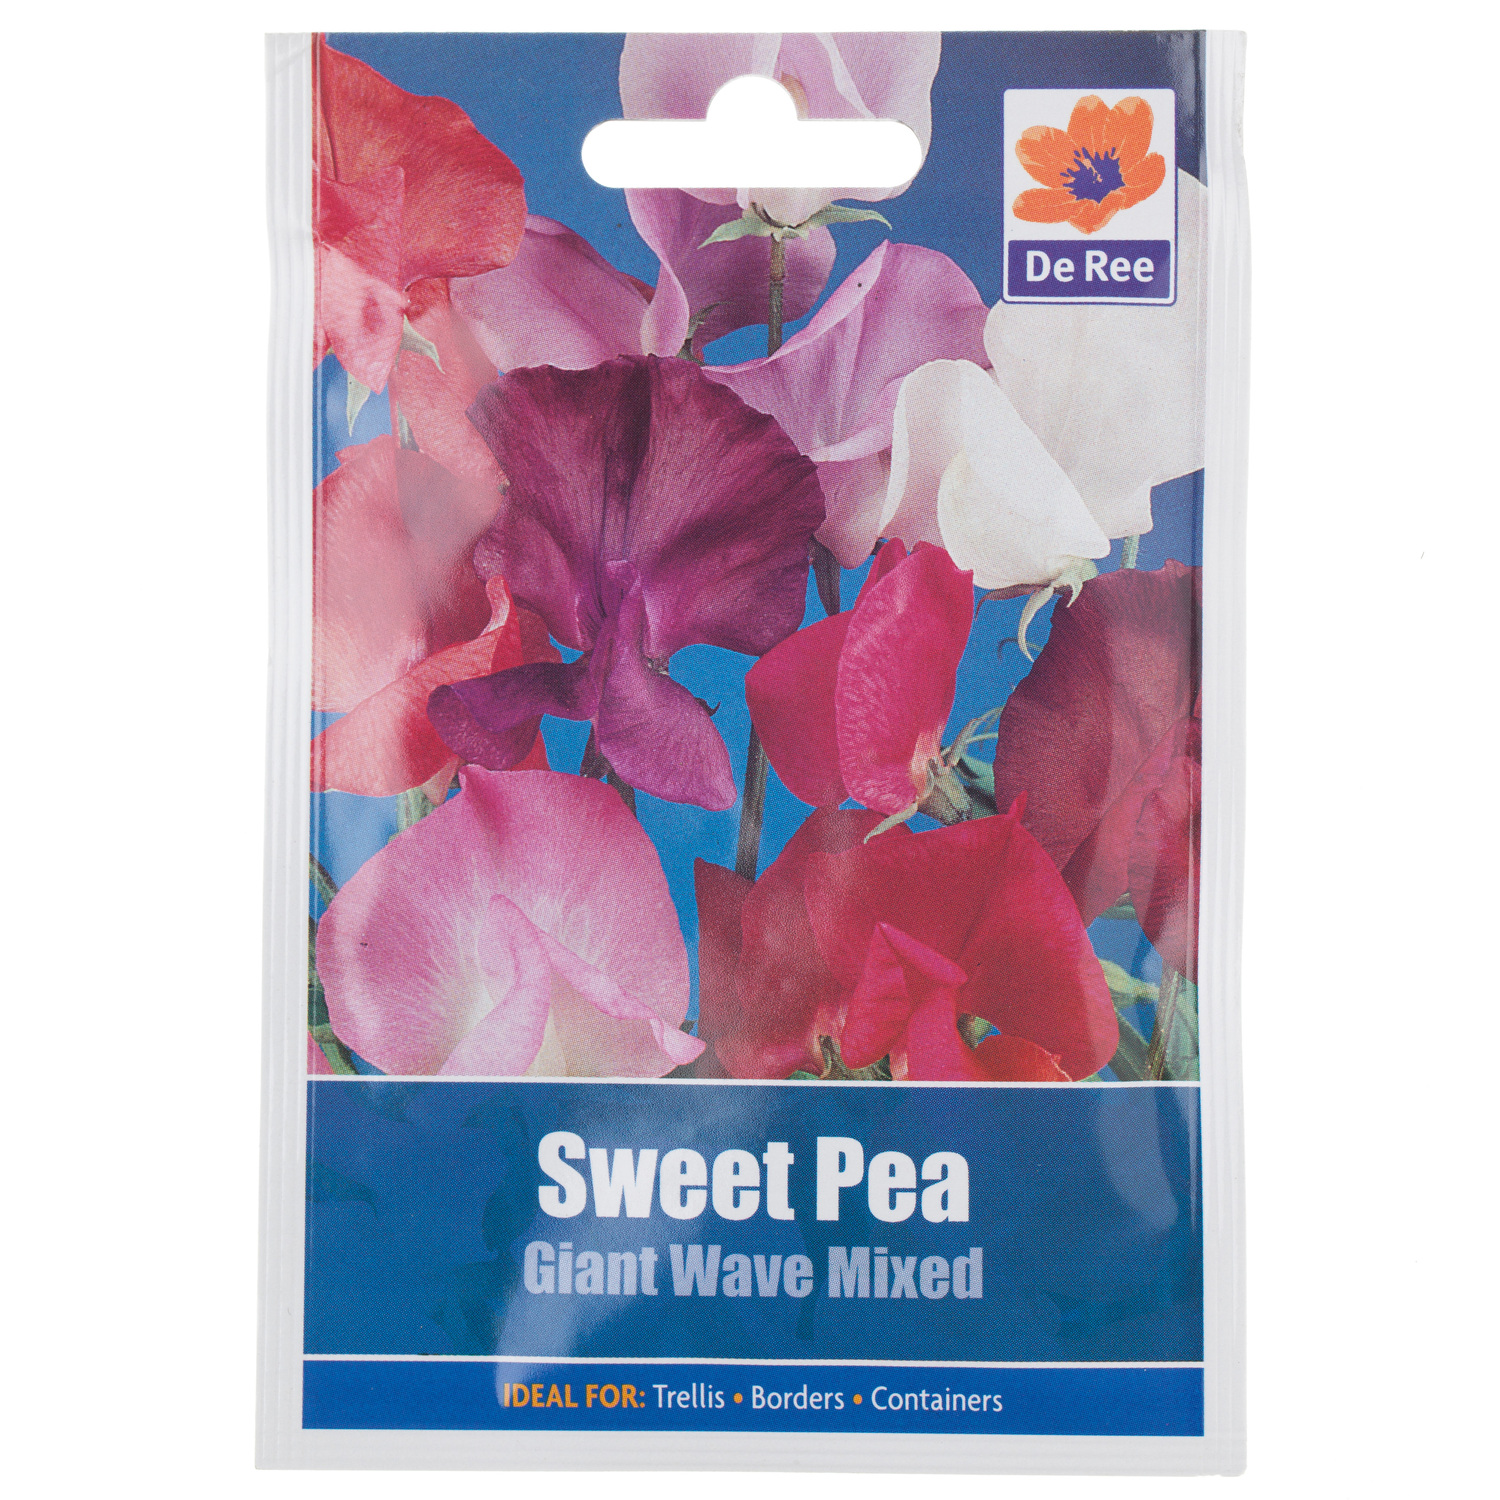 Sweet Pea Giant Wave Seed Packet Image